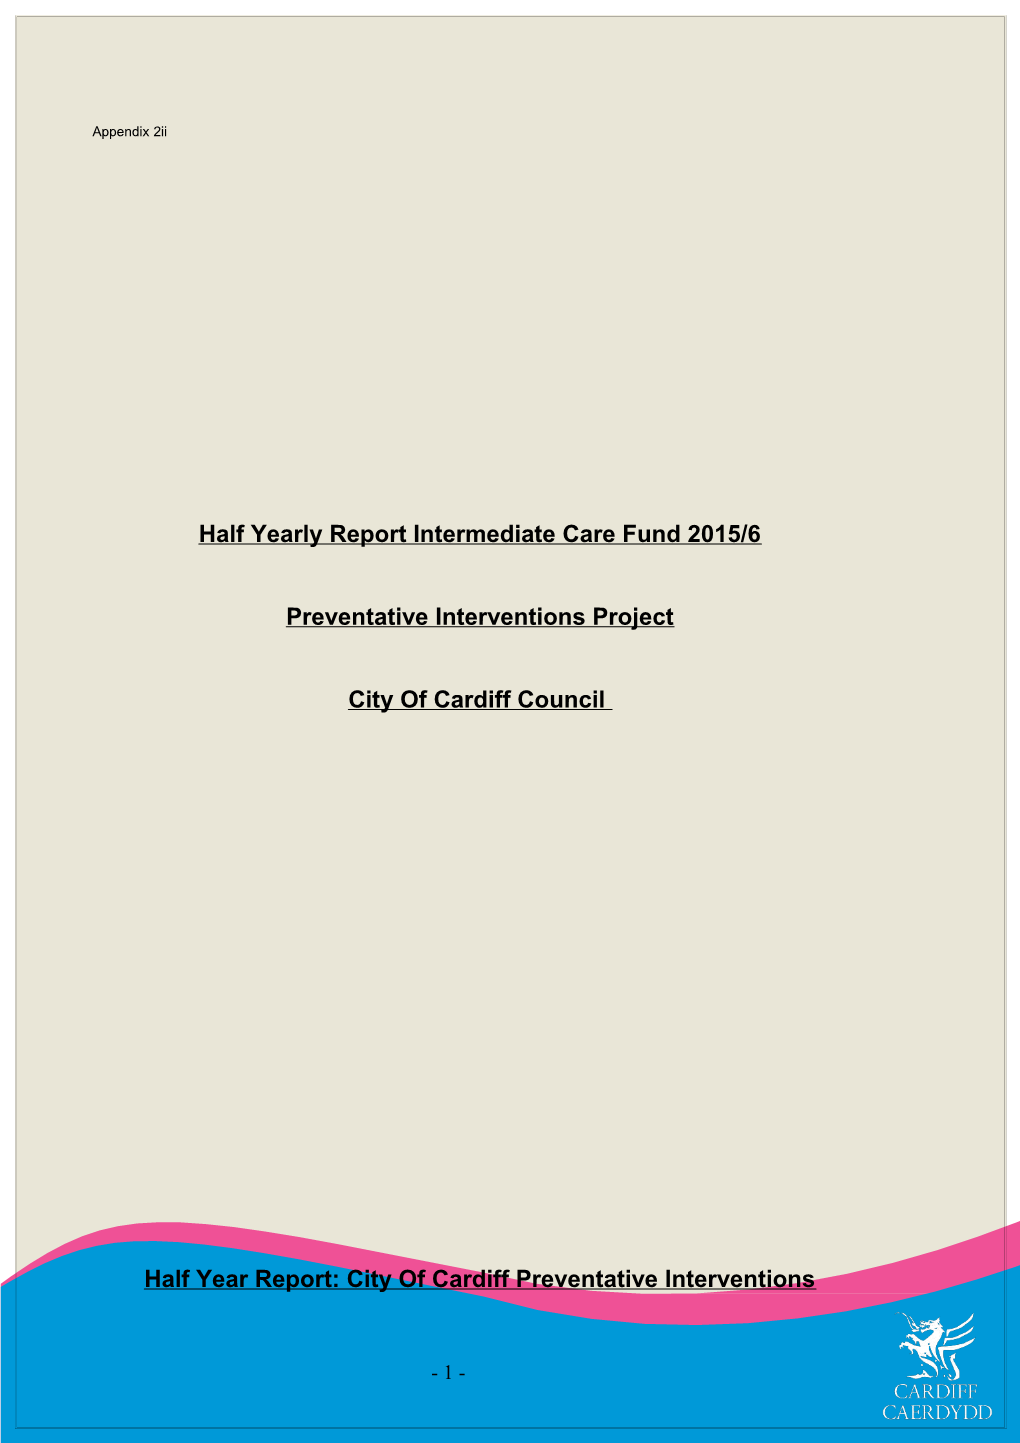 Half Yearly ICF Report: City of Cardiff